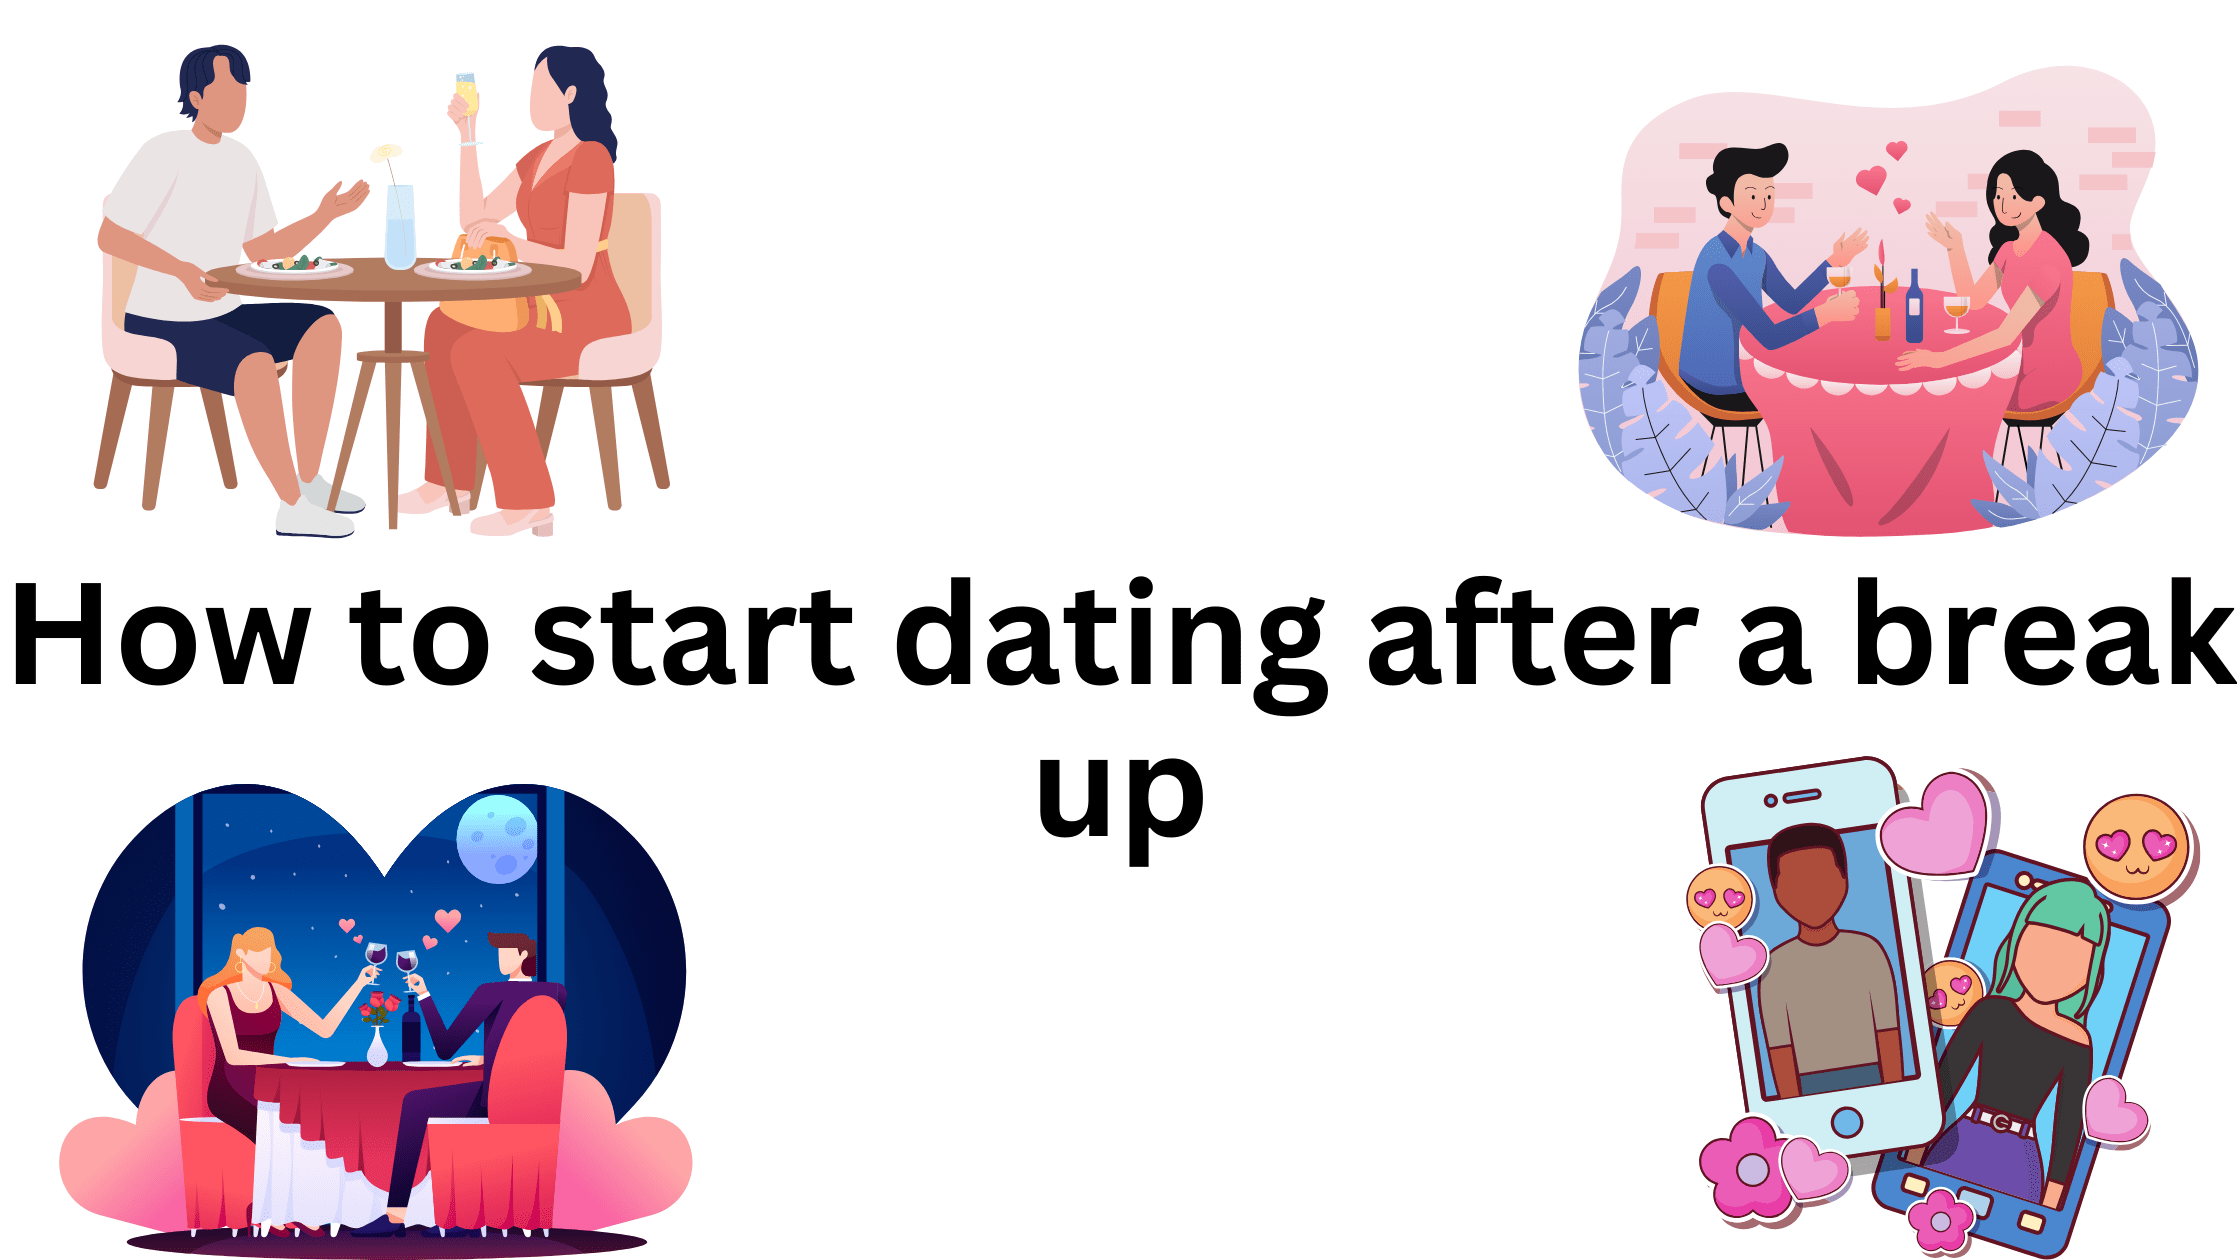 10 Great Ways to Start Dating After a Break Up 20